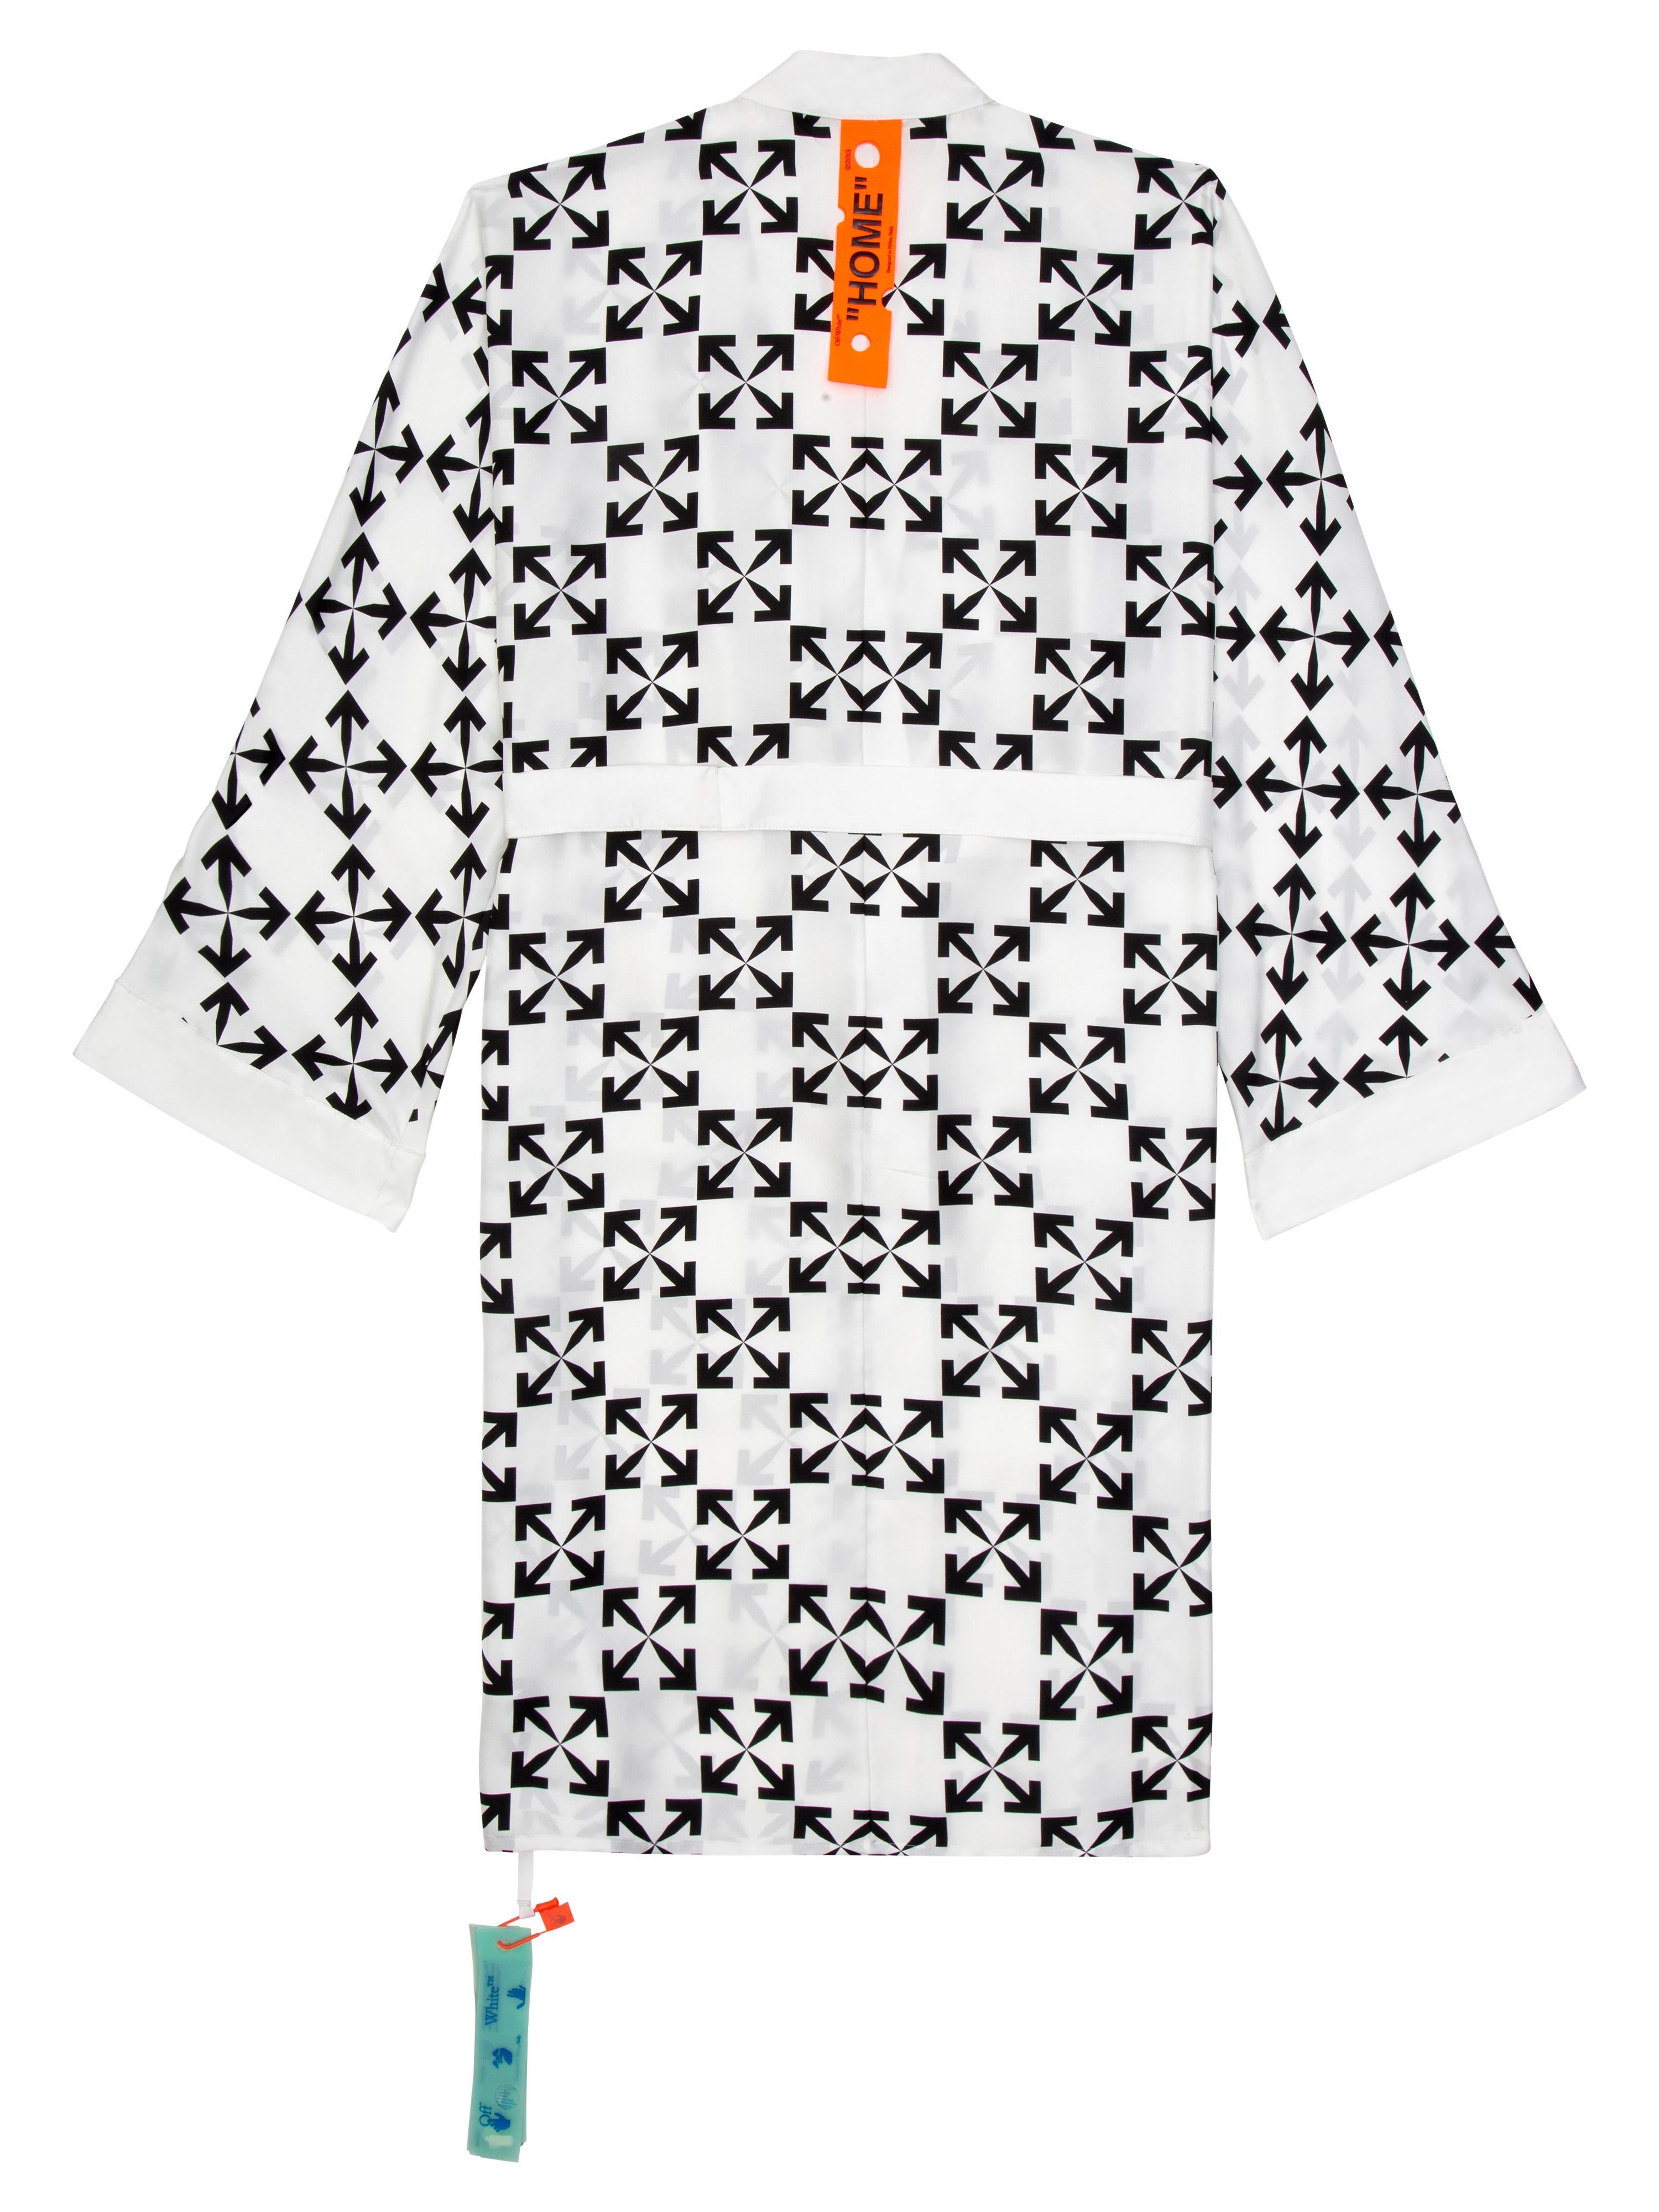 Silk Robe with belt in black arrow pattern on a white base. HOME orange loop on the back.
By Virgil Abloh
Size: Medium
This item is only available to be purchased and shipped to the United States.
  